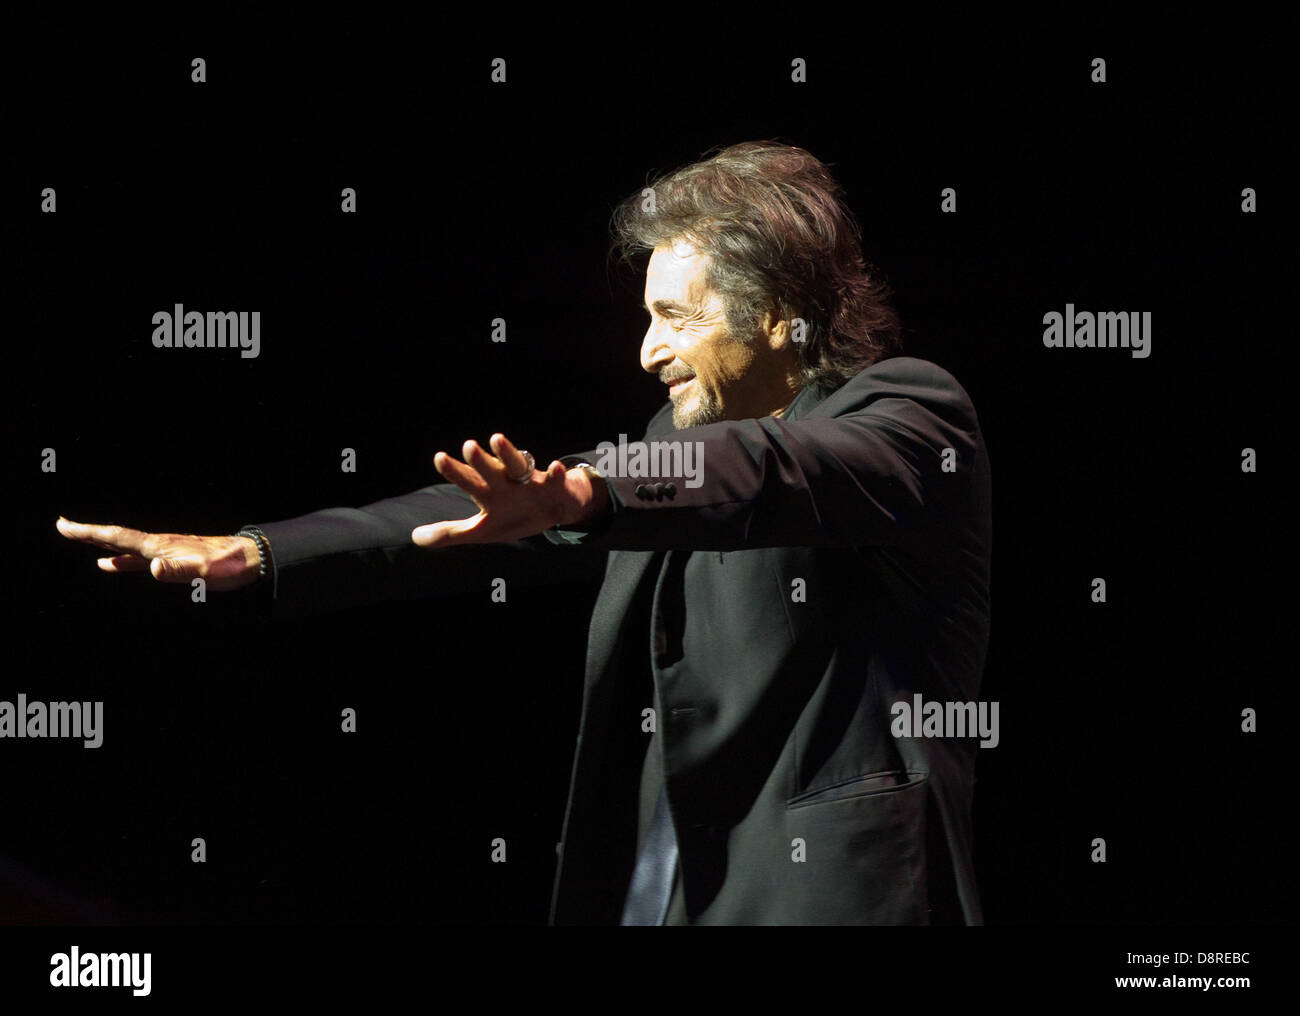 London, UK. 2nd June, 2013. An Evening With Pacino, at The Palladium, London, UK. A one off event in which Al Pacino was interviewed by Emma Freud, as clips from his best-known movies were shown, and and questions were answered from an adoring audience. Credit:  Jeff Gilbert/Alamy Live News Stock Photo